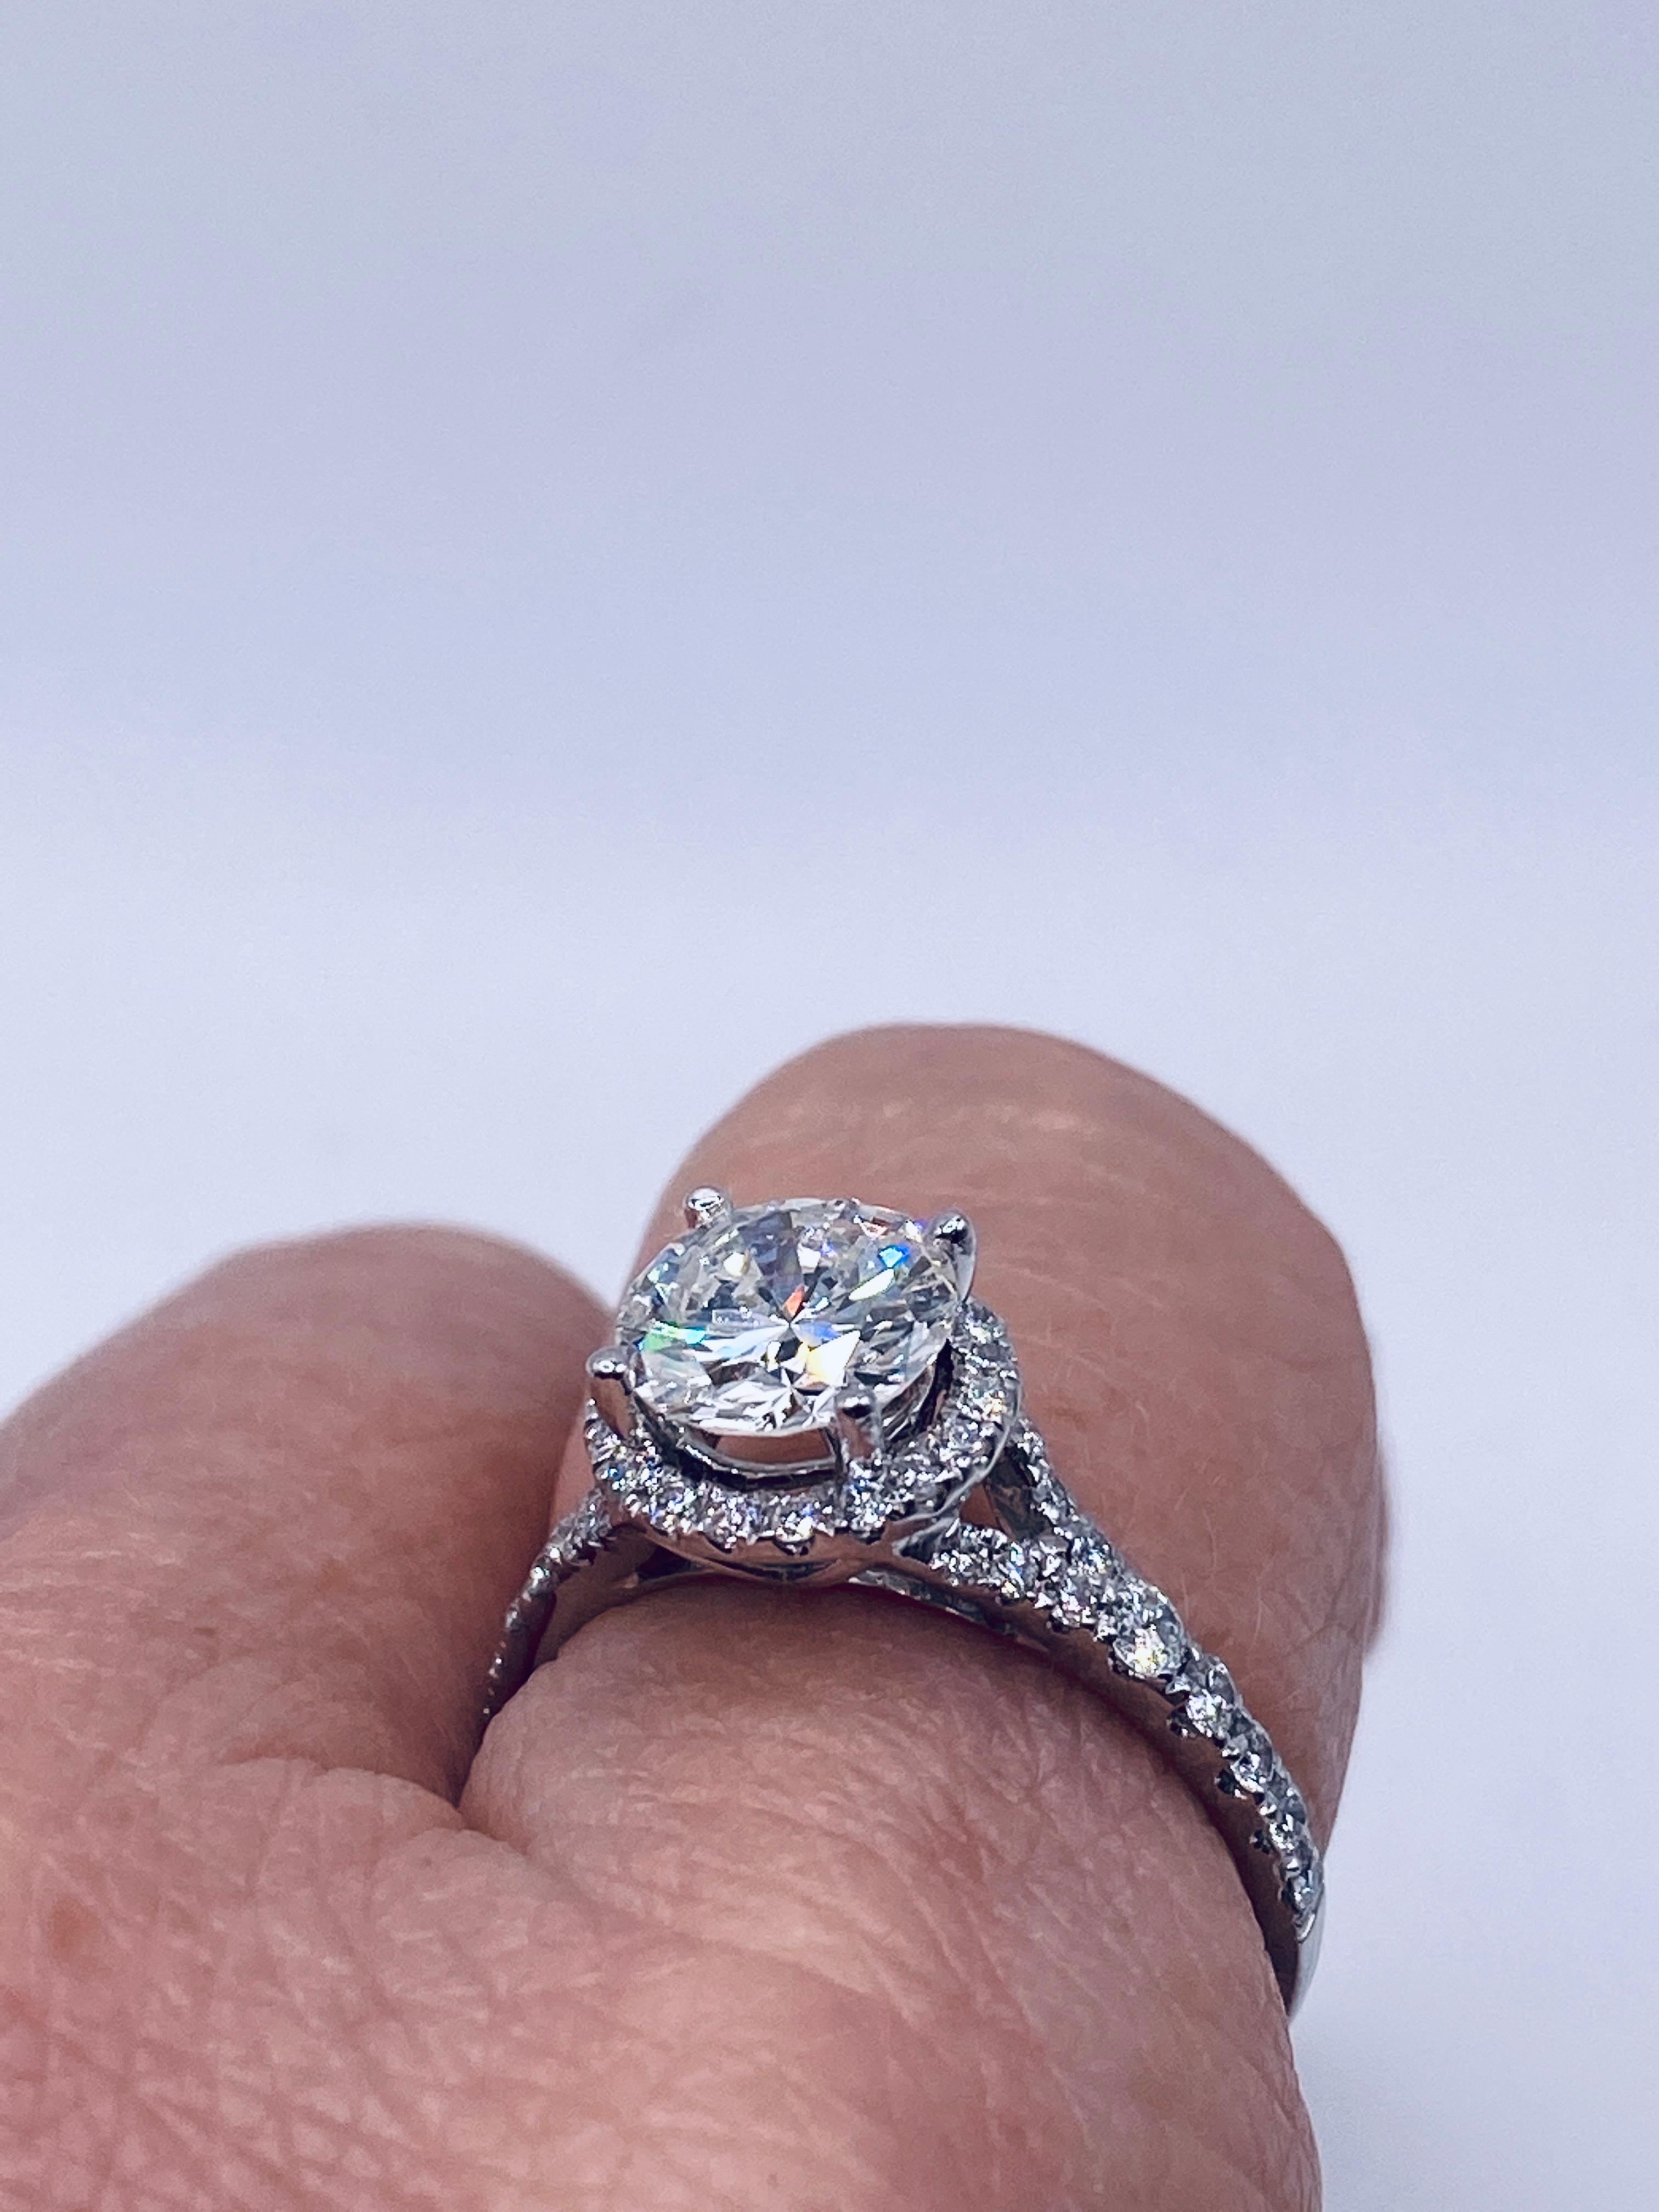 1.51 Carat Round Brilliant Cut Diamond Engagement Ring with Semi Mount Setting For Sale 1